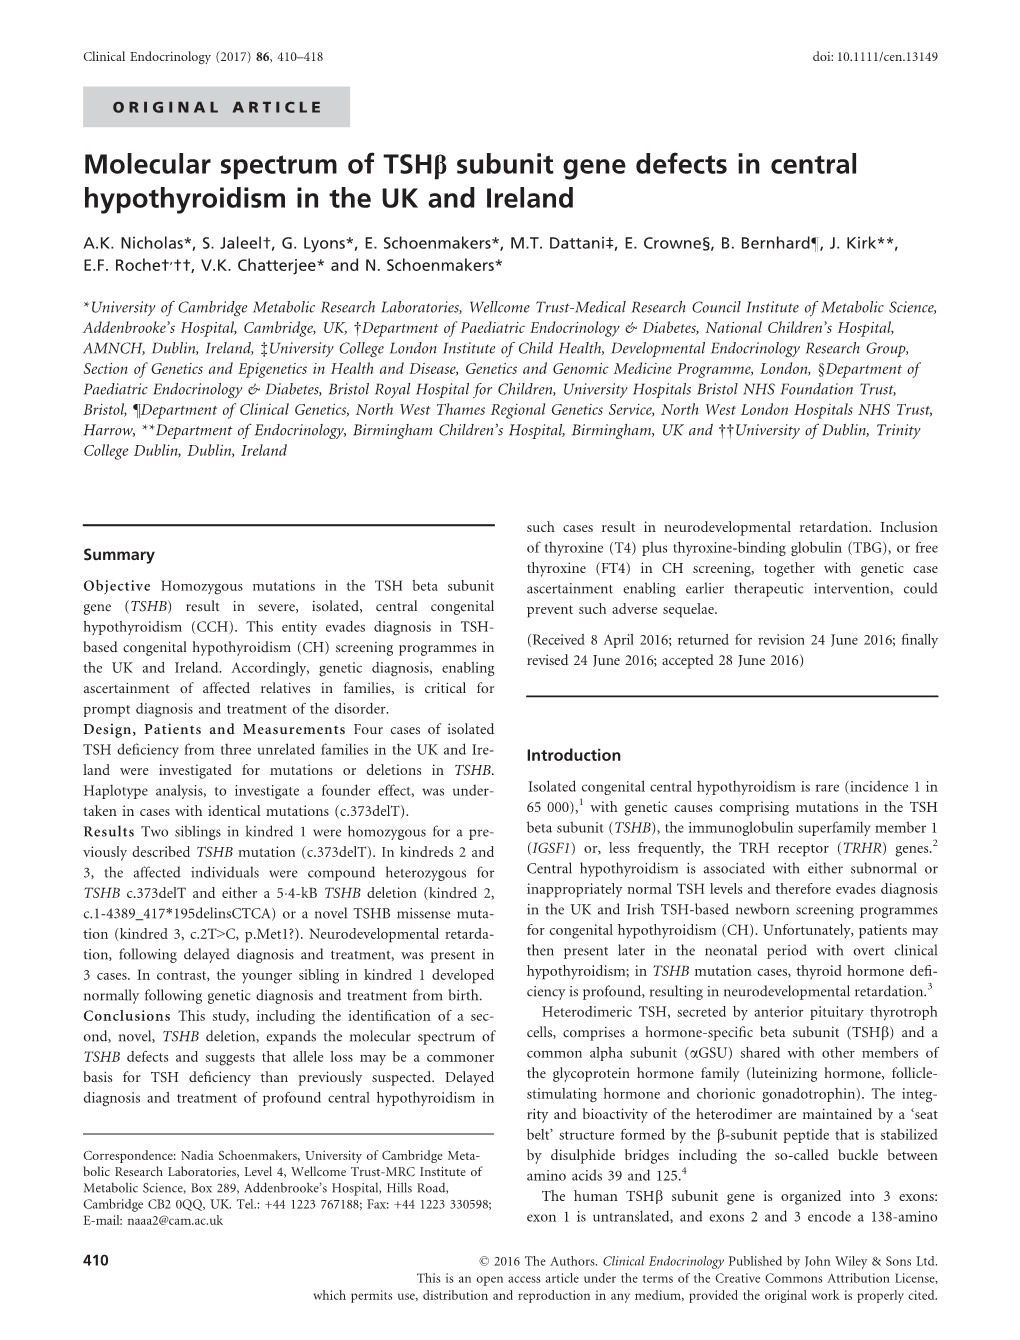 Subunit Gene Defects in Central Hypothyroidism in the UK and Ireland